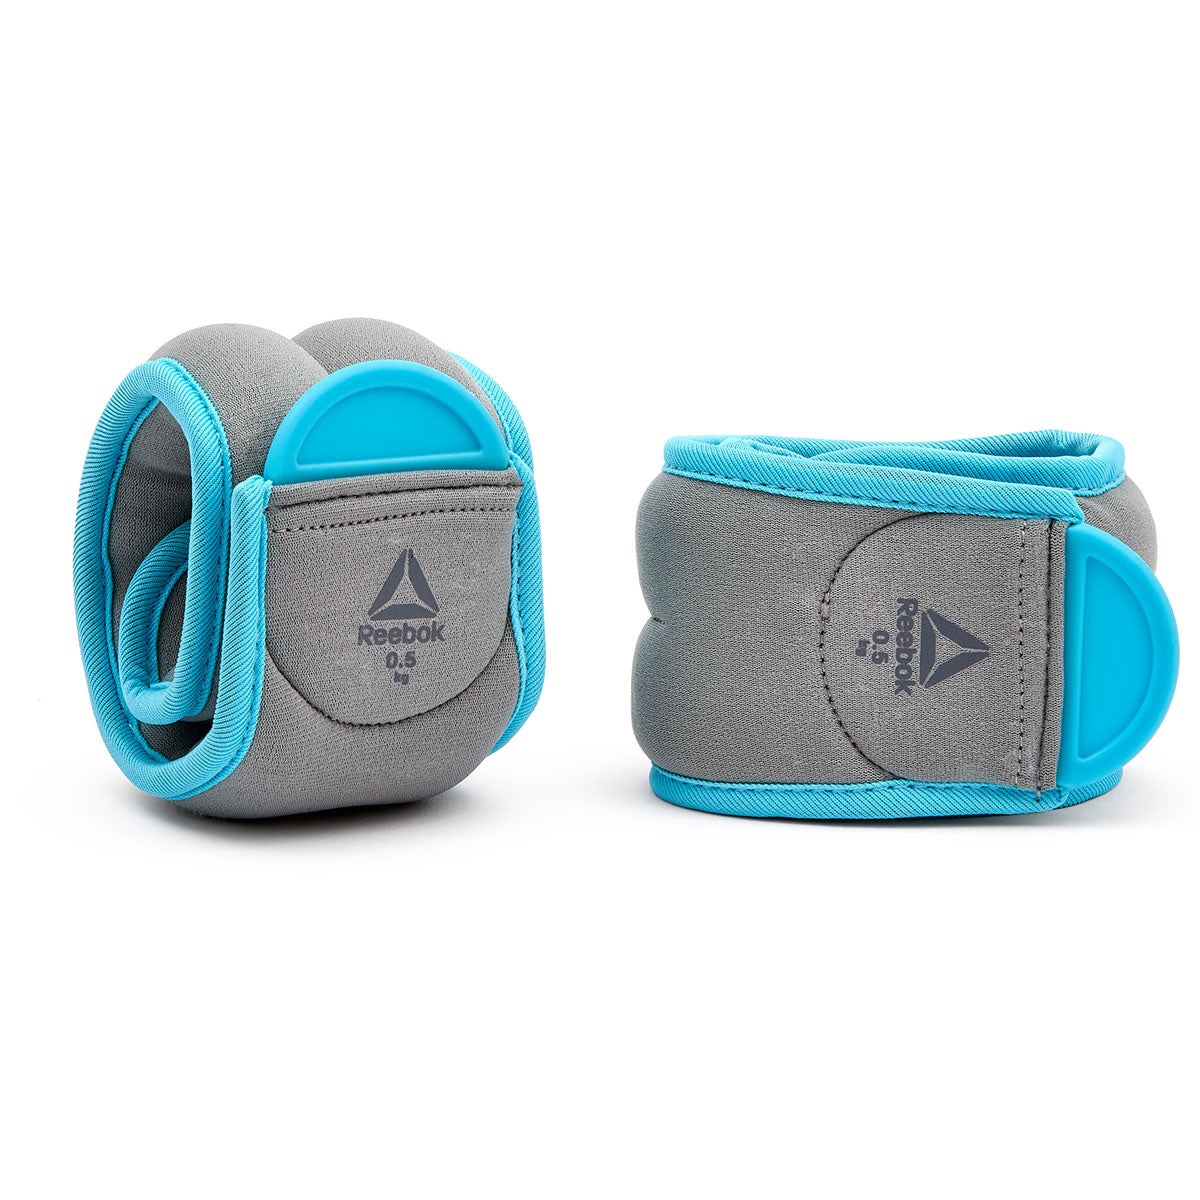 Ankle Weights - 0.5kg | Reebok Fitness 